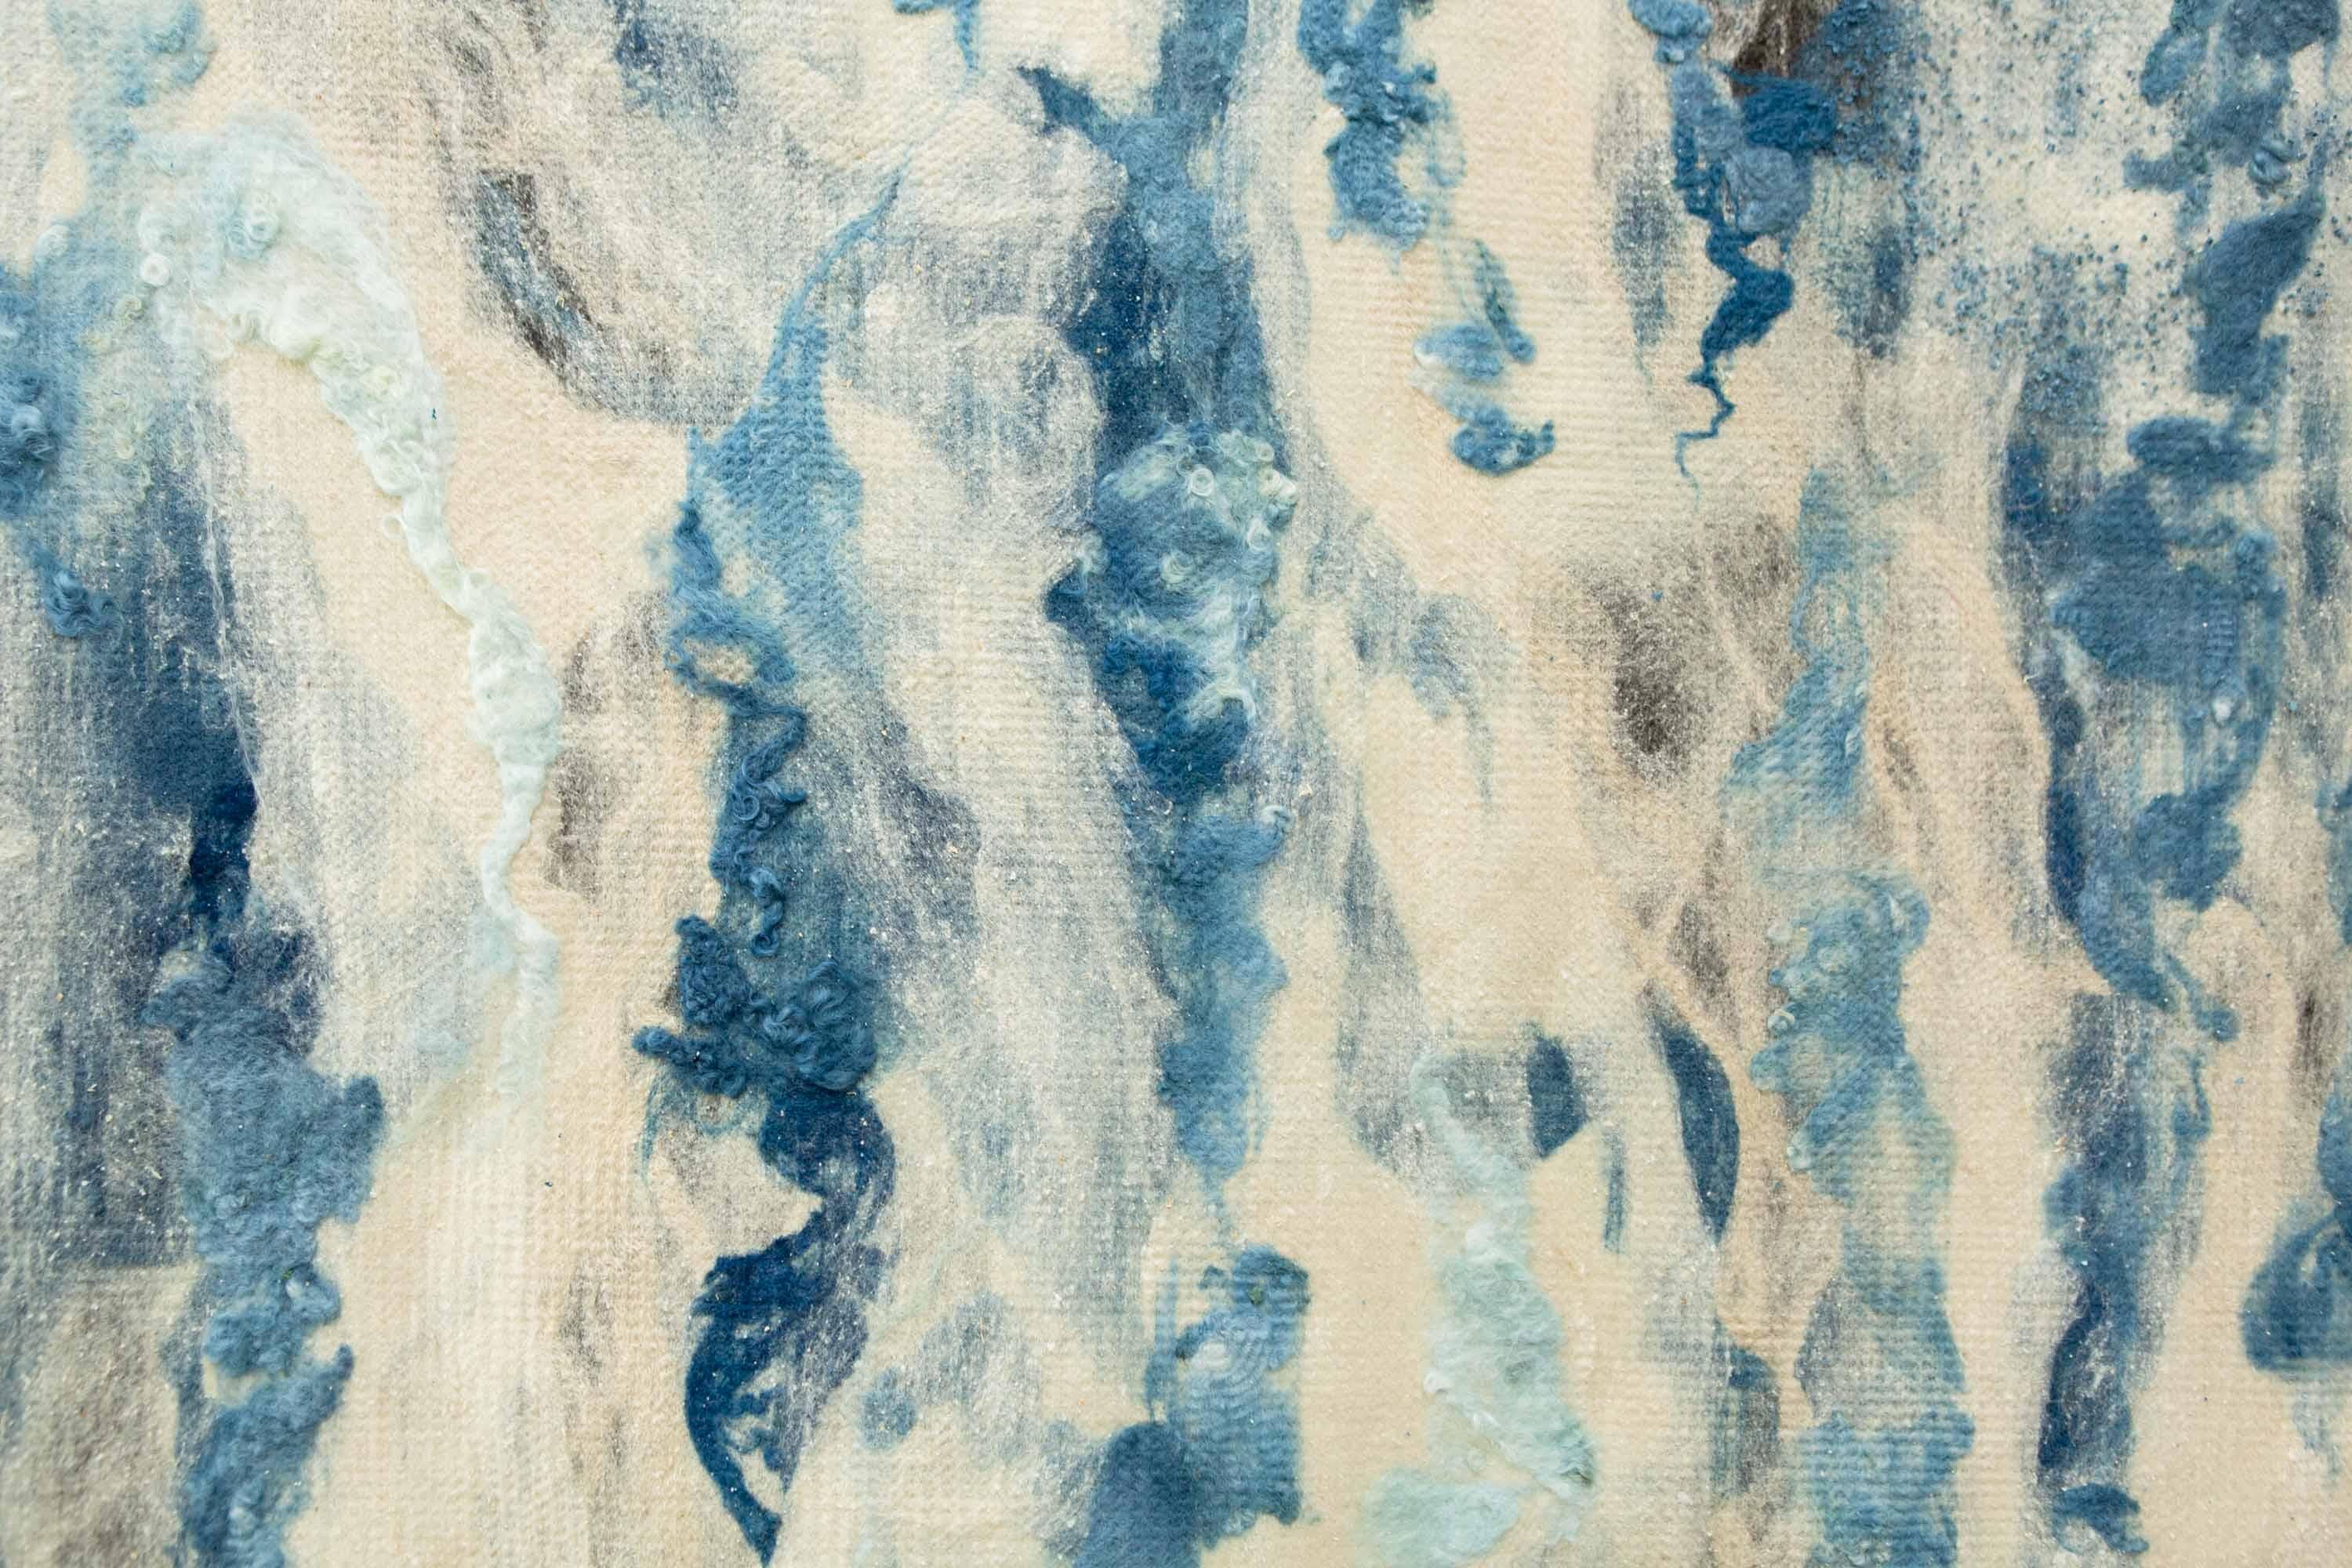 Hand-Crafted Felted Wool Wall Art by JG Switzer, Indigo Raw Dyed Wool with Seaweed & Silk